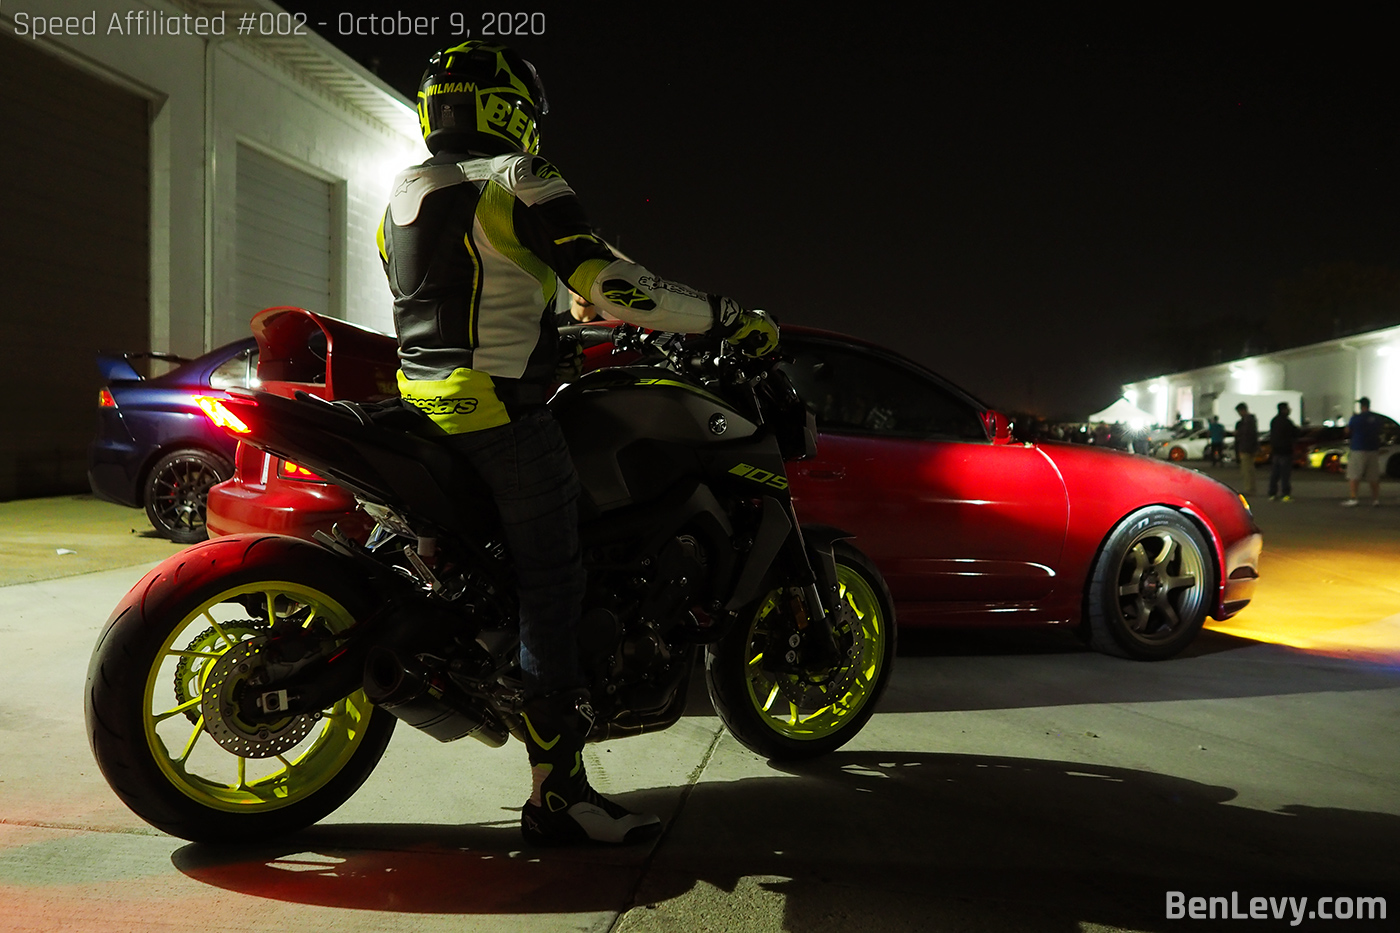 Yamaha MT-09 and Celica GT-Four